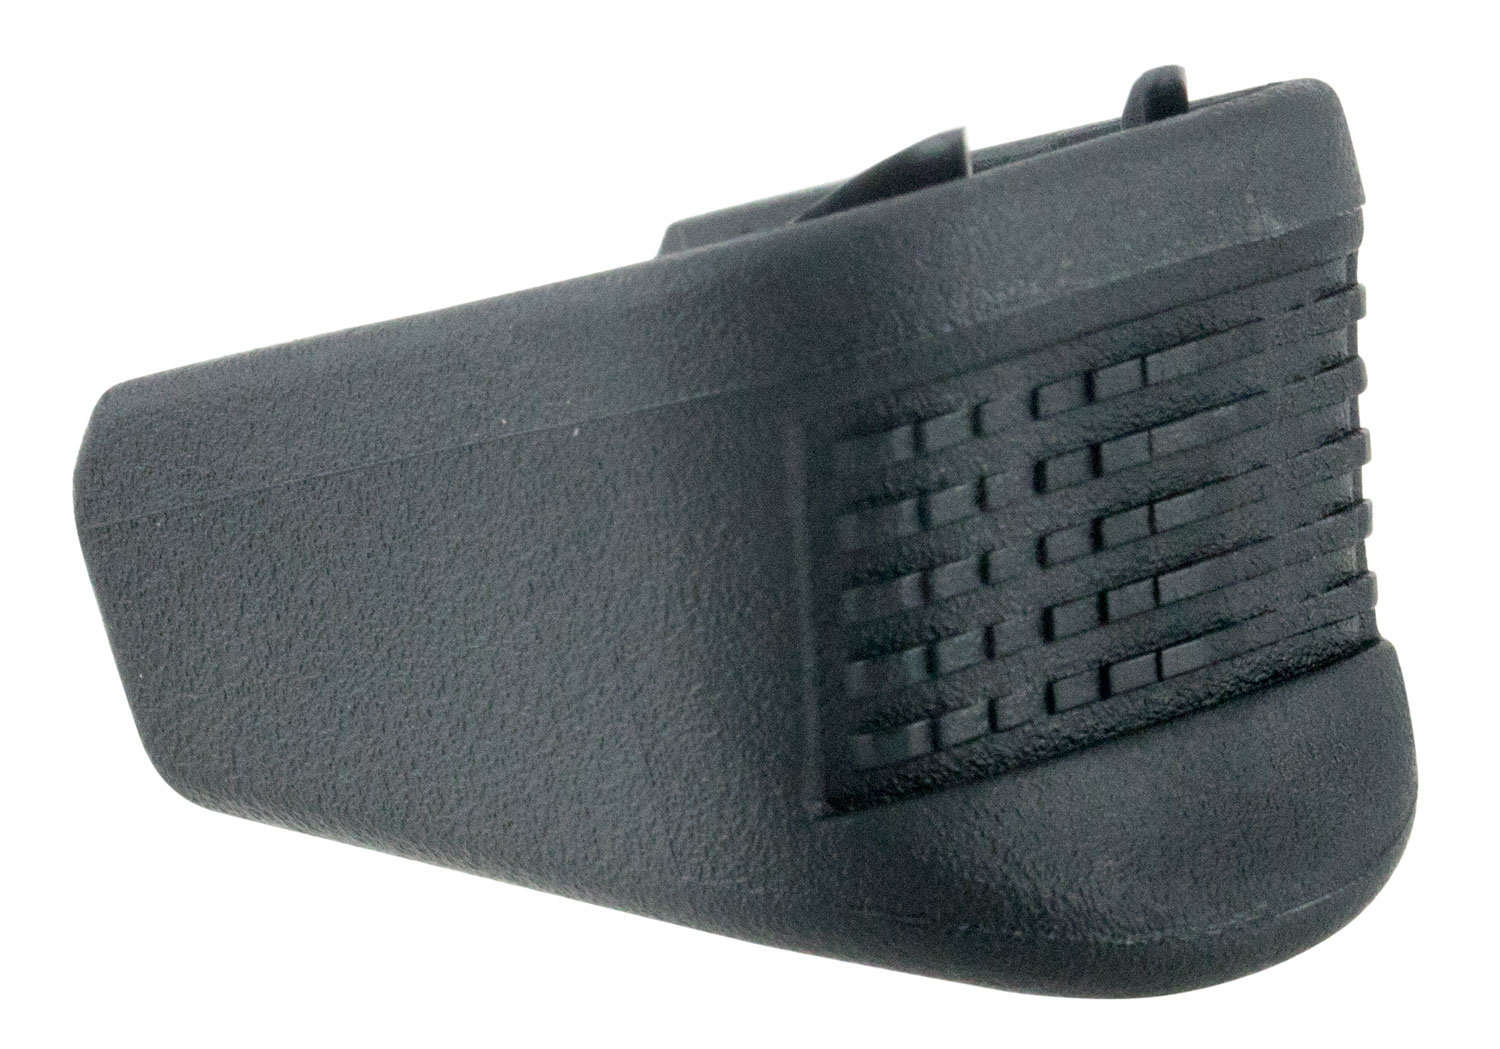 Pearce Grip PGGP Magazine Extension  Extended, Compatible w/ Glock, Black Polymer